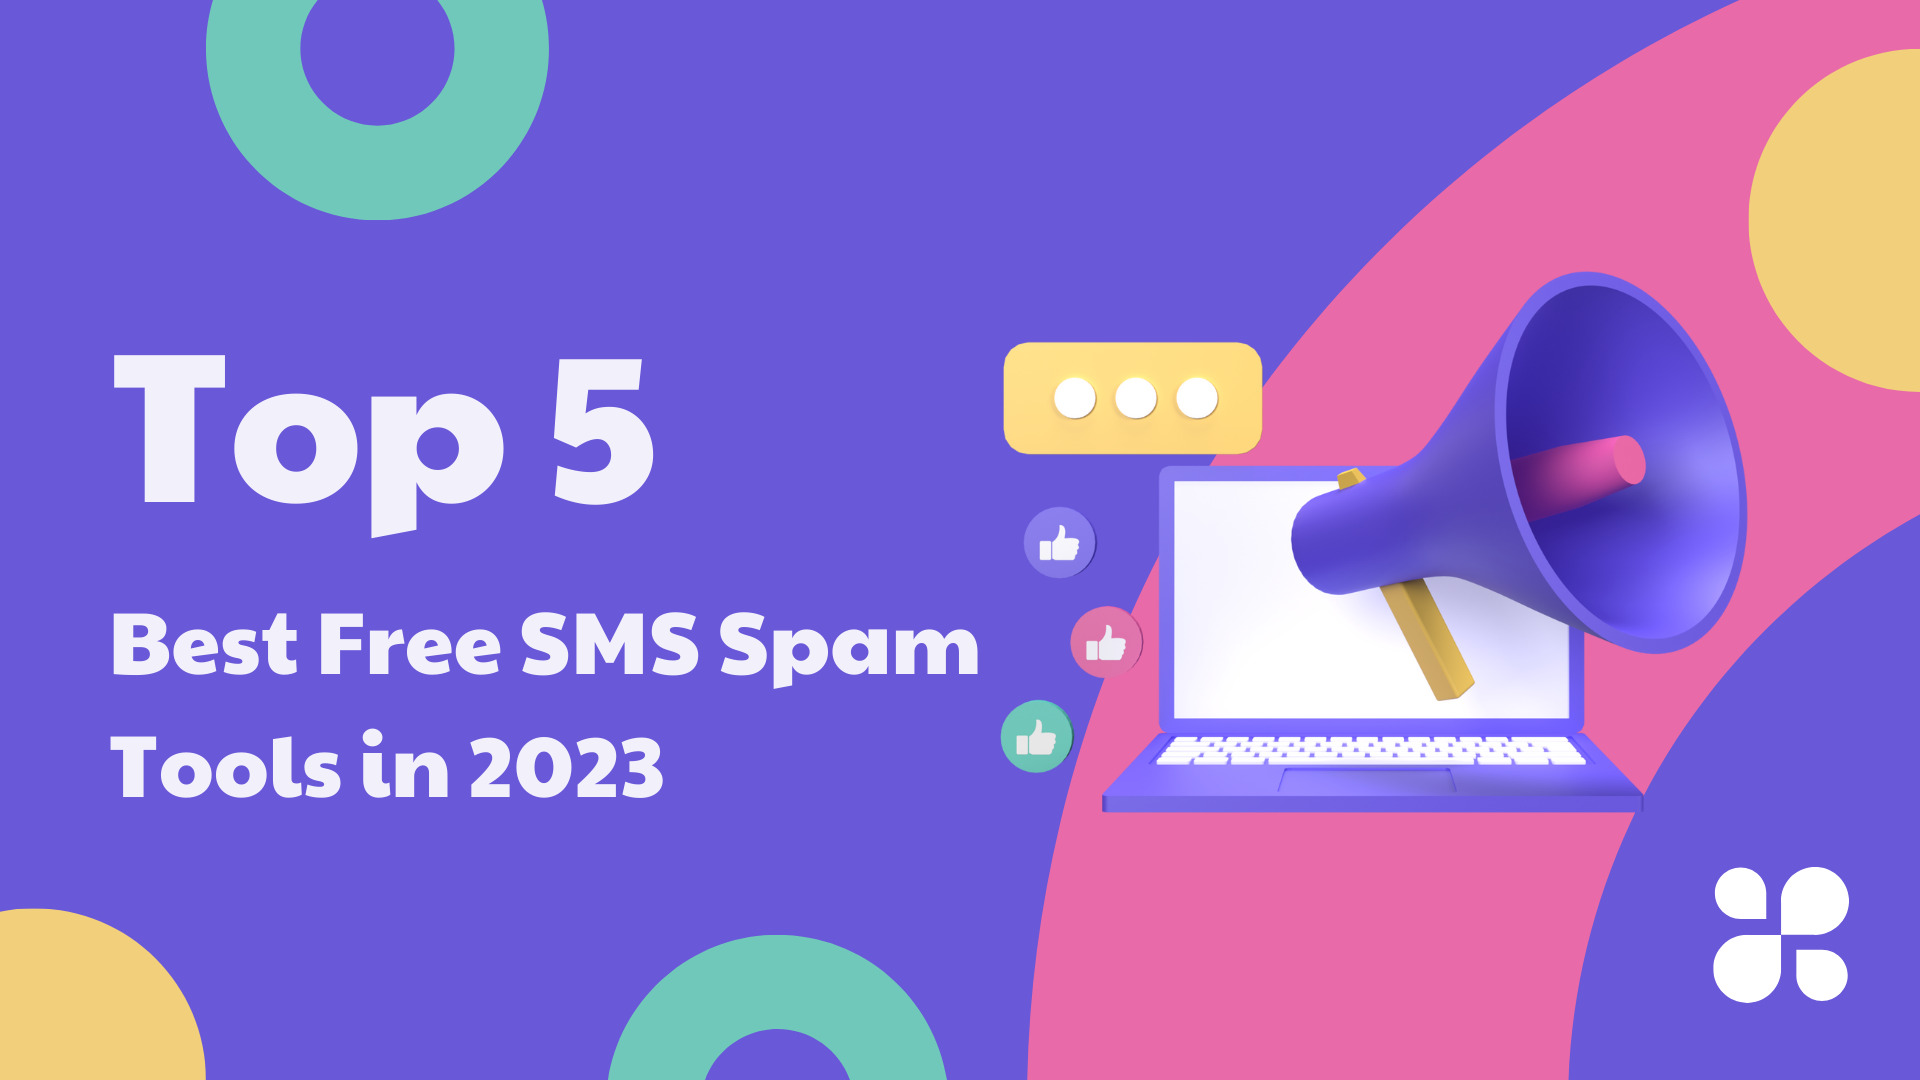 Top 5 Best Free SMS Spam Tools in 2023